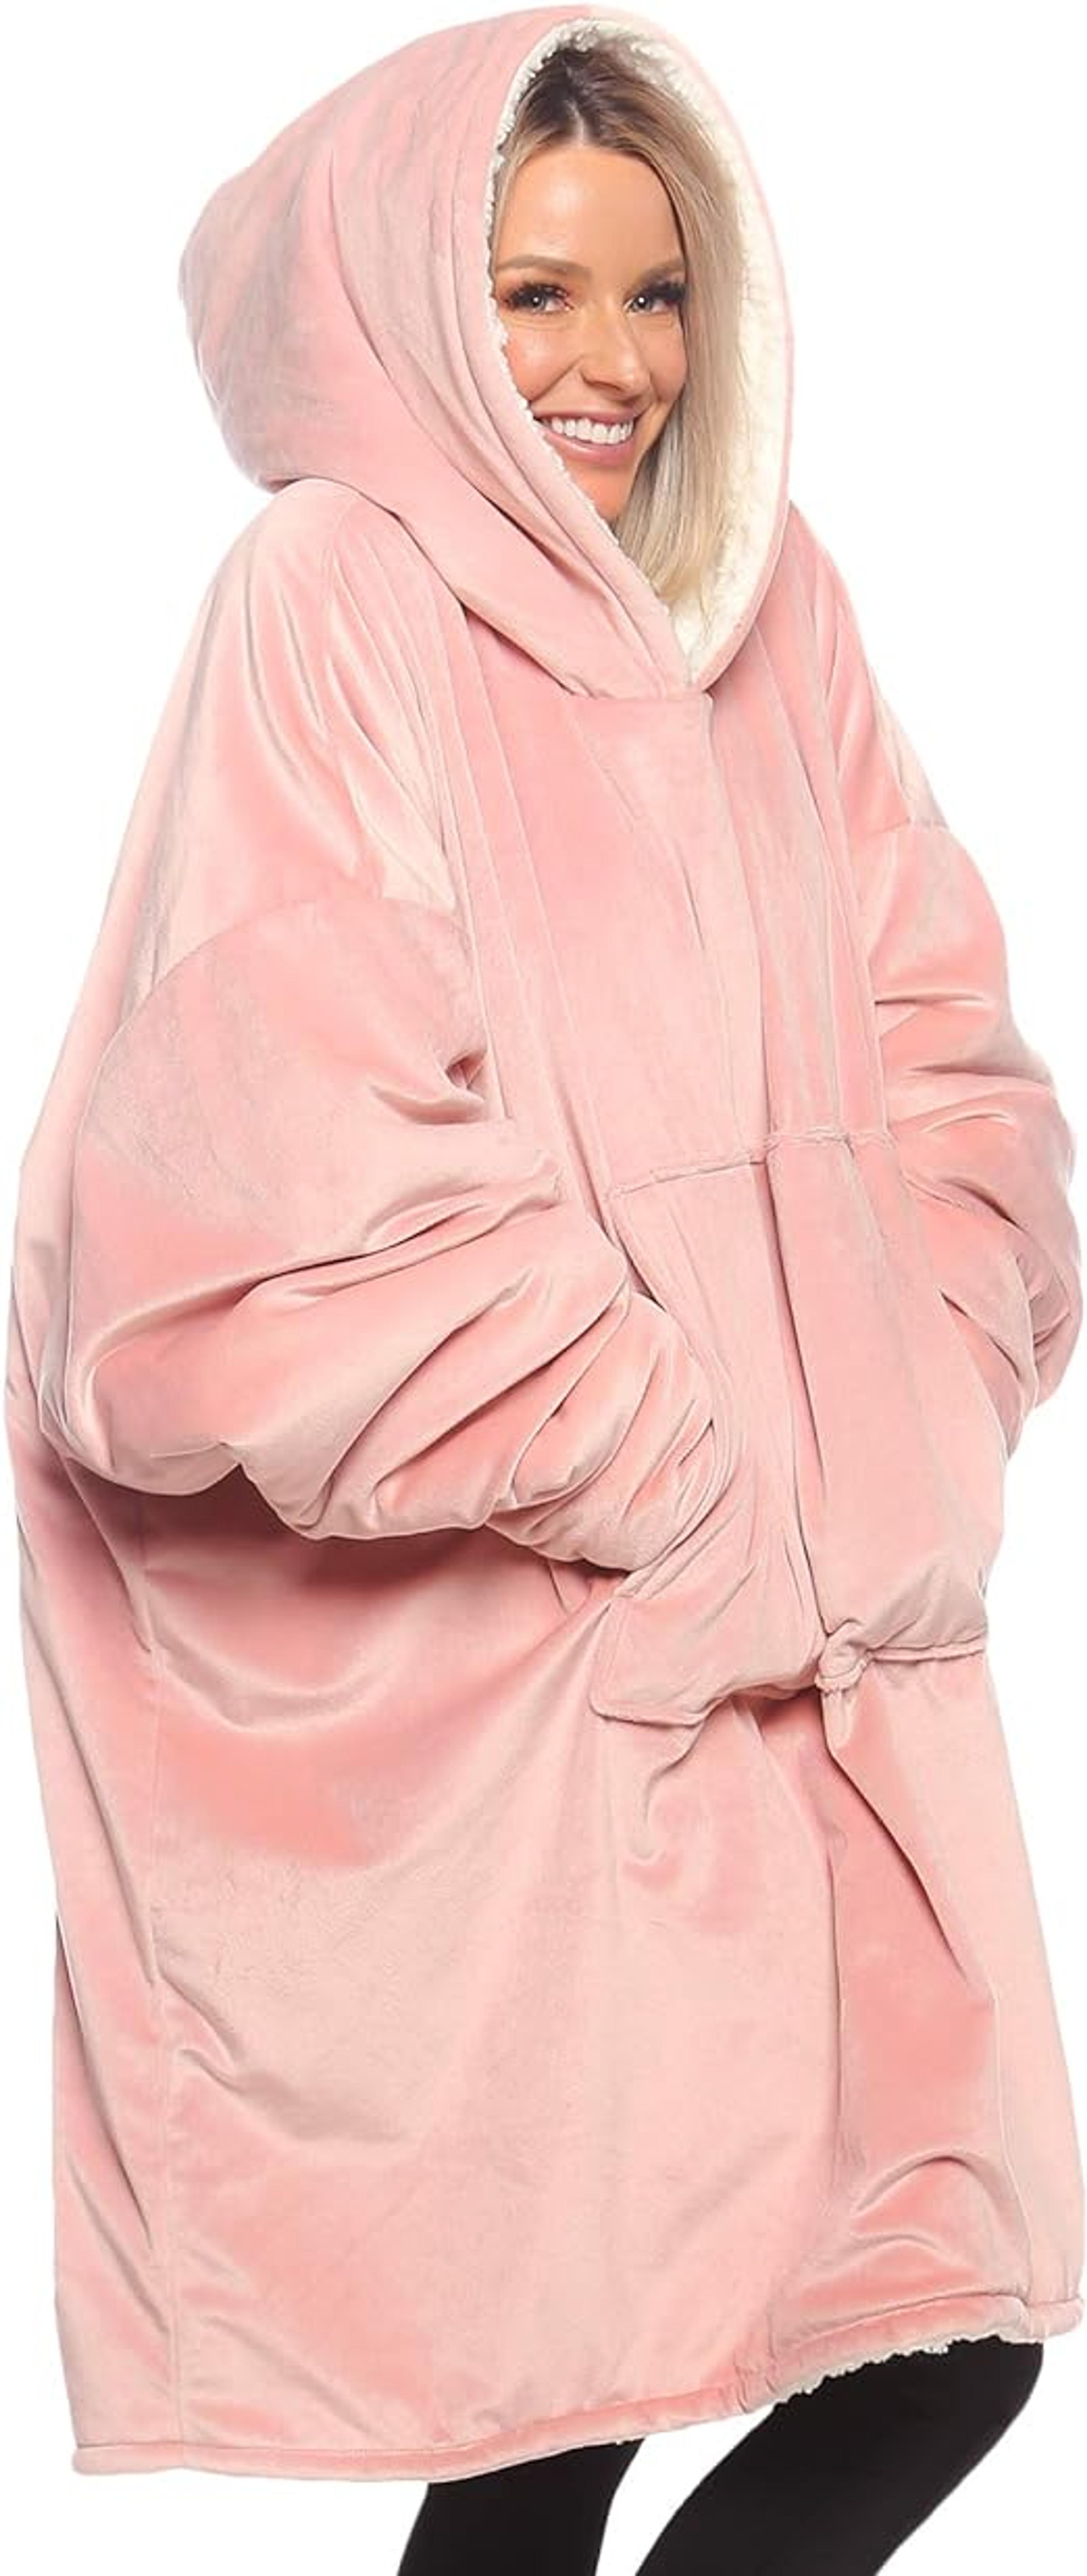 THE COMFY Original | Oversized Microfiber & Sherpa Wearable Blanket, One Size Fits All, Seen On Shark Tank, One Size for All (Blush) : Amazon.ca: Home